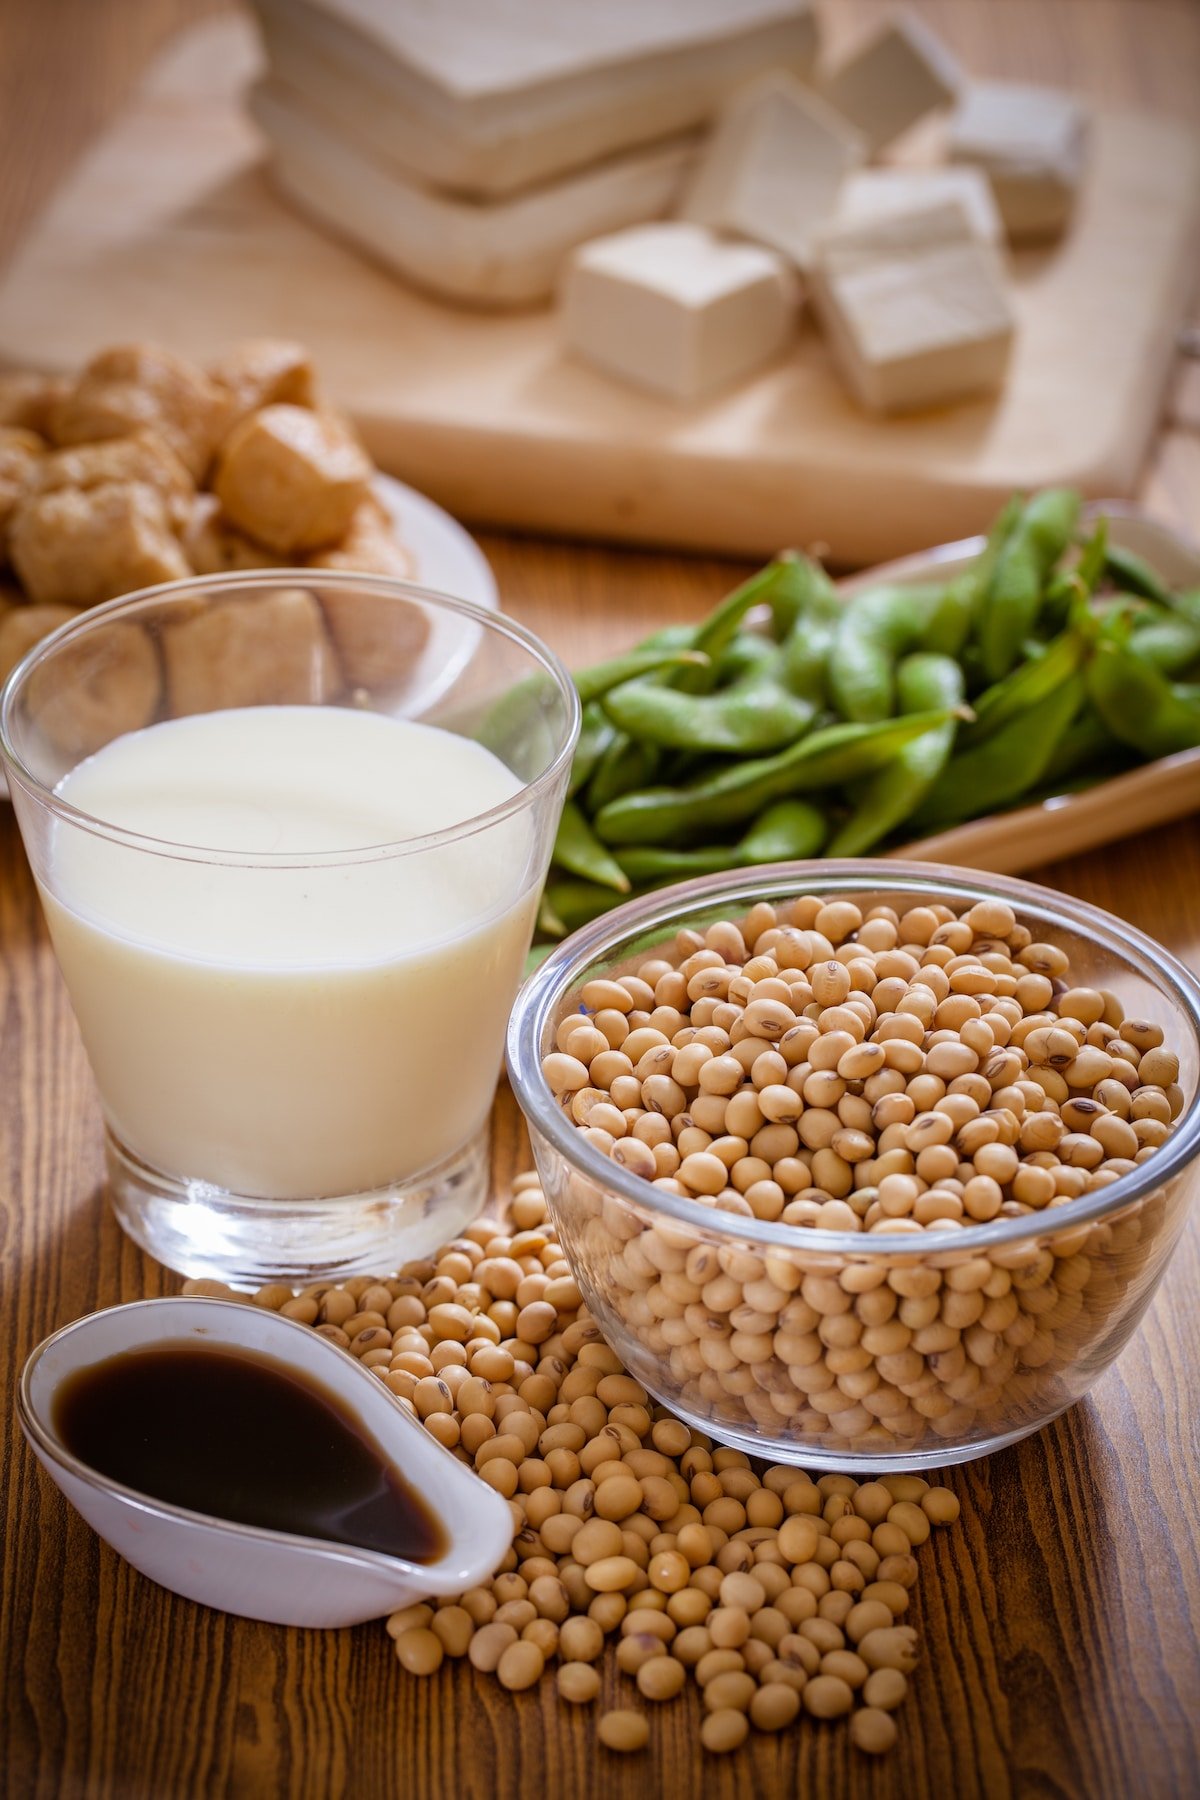 soy foods on a tabletop.